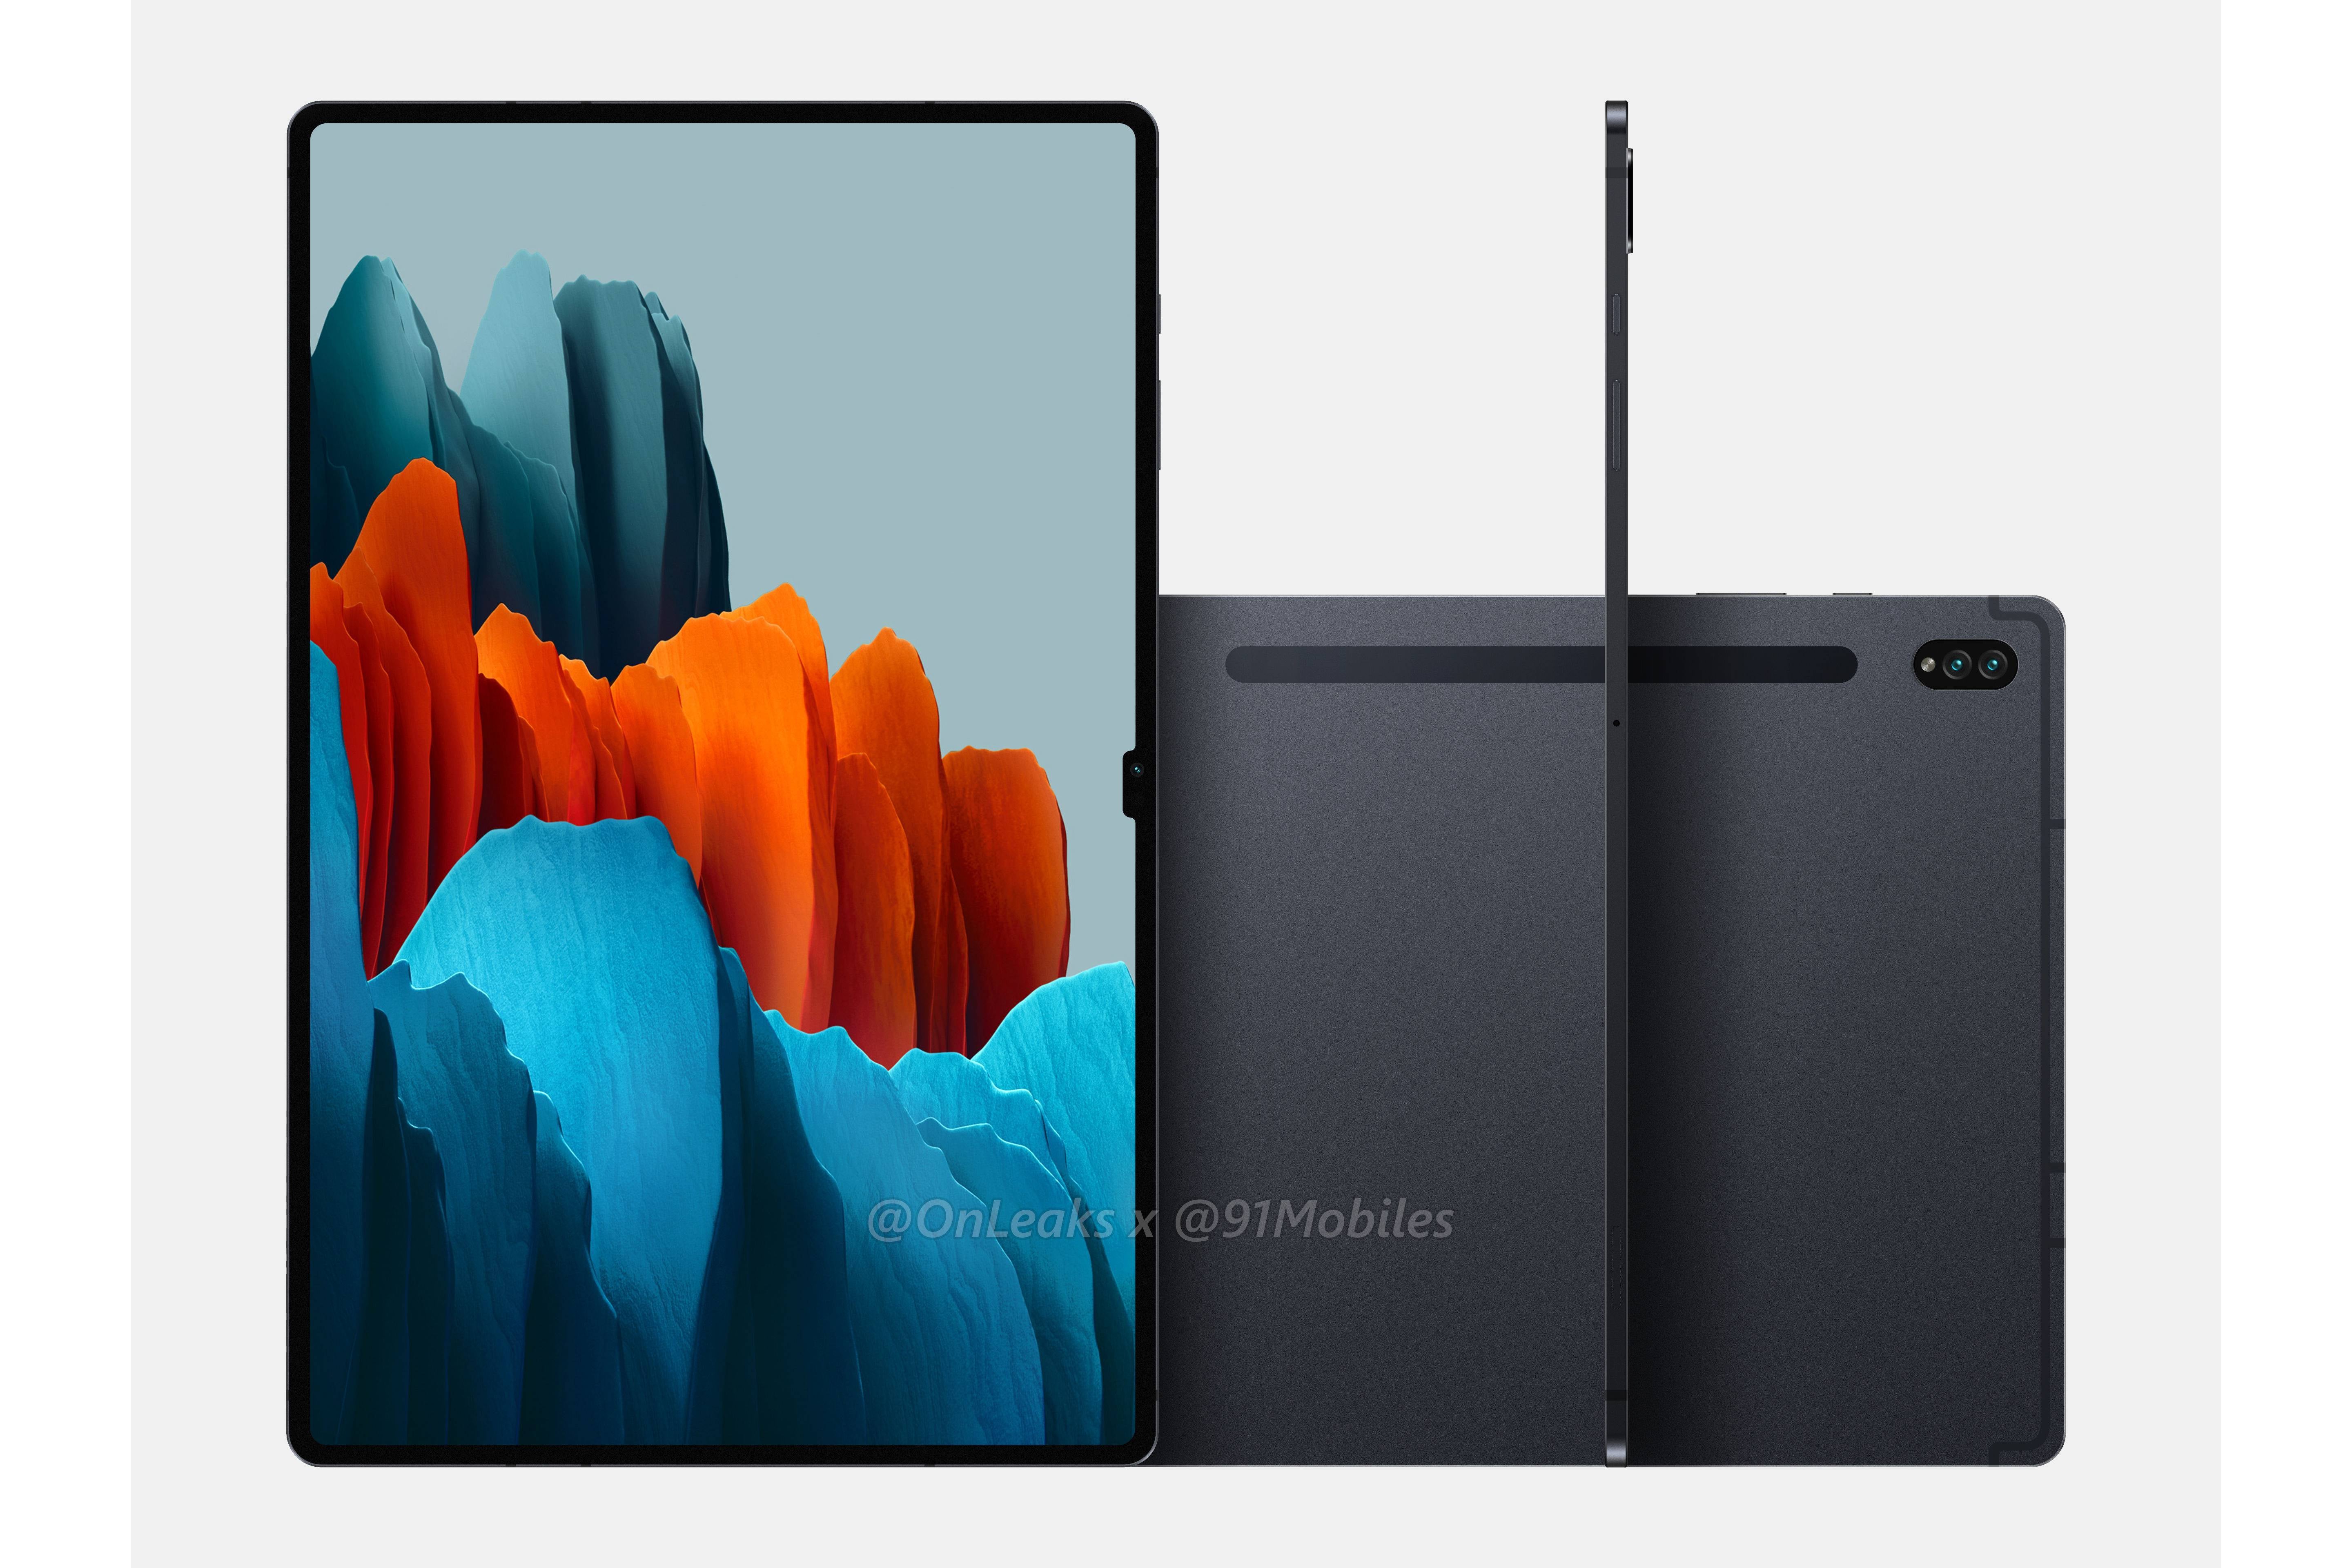 Only the Galaxy Tab S8 Ultra is expected to feature a notch - Samsung Galaxy Tab S8 Ultra leaks with Apple MacBook Pro-style notch